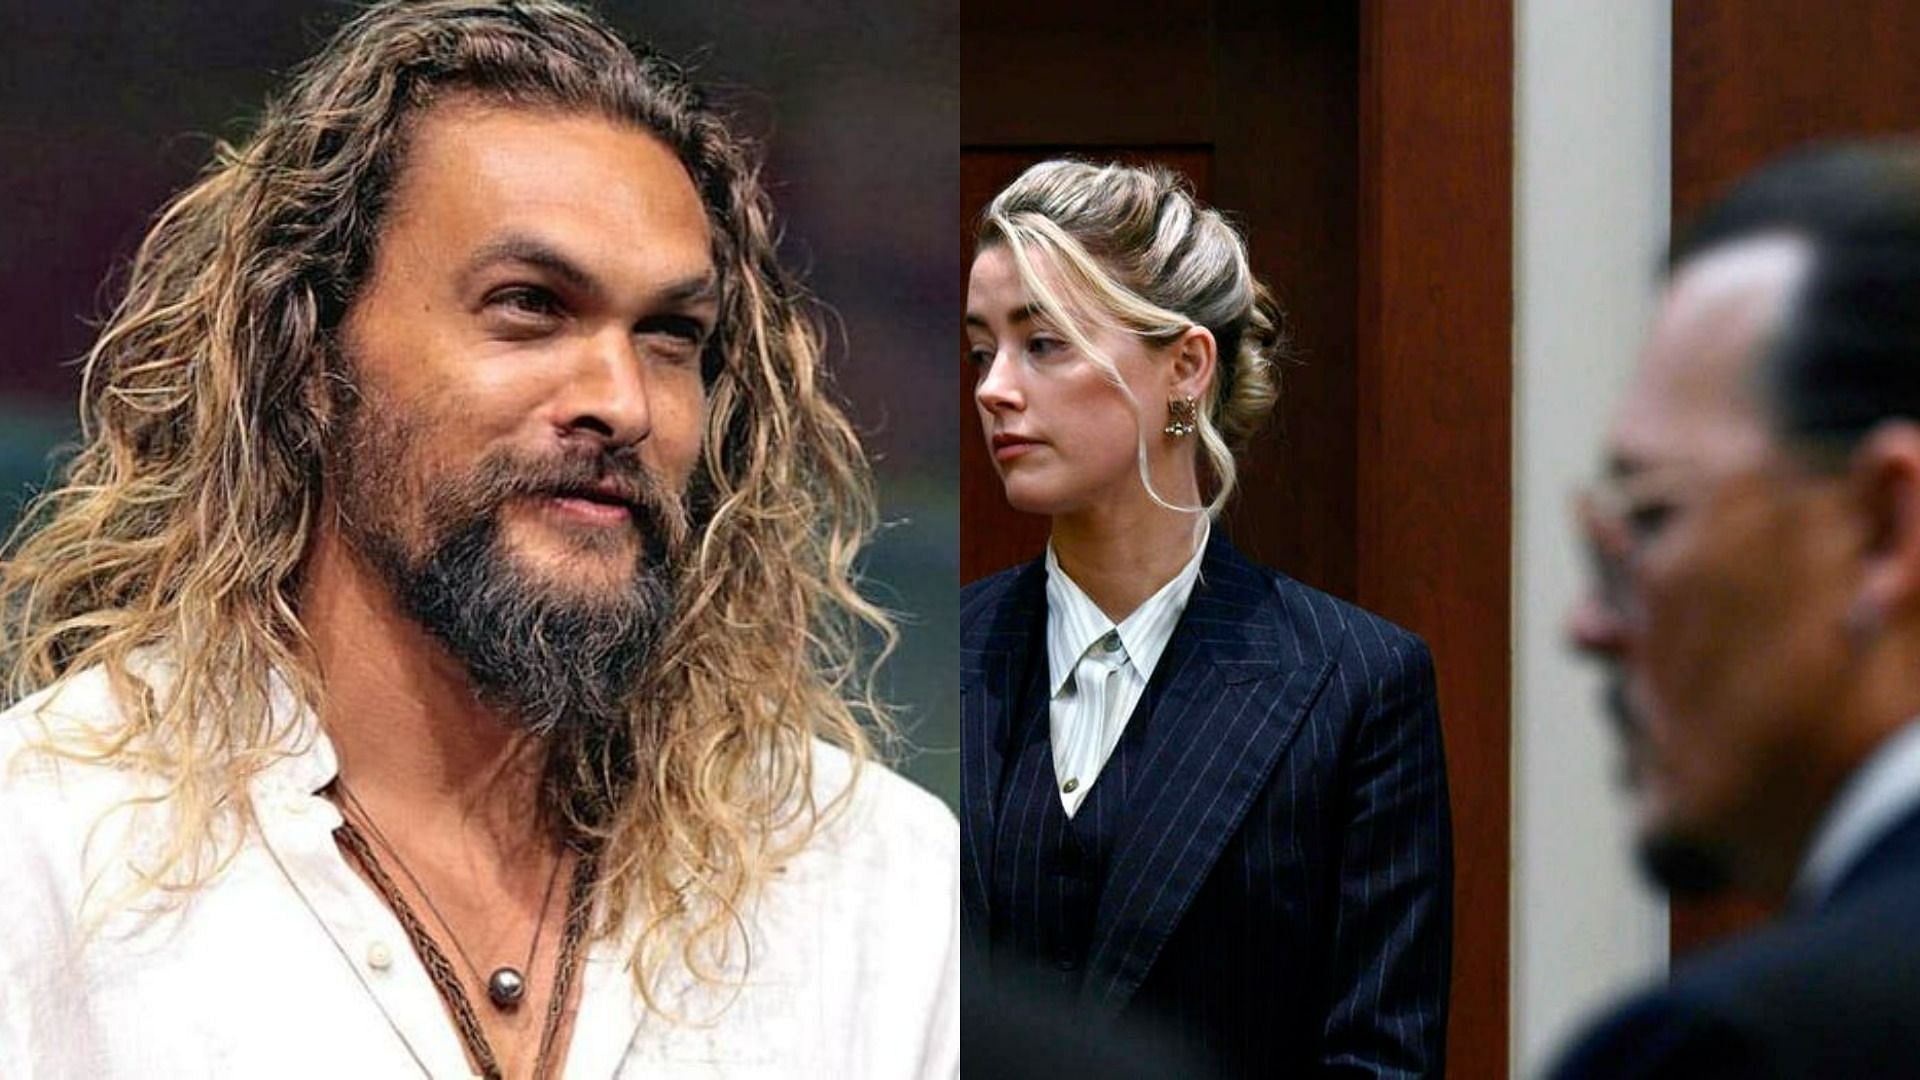 Jason Momoa appears as a witness in the Depp-Heard defamation trial in a spoof video (Image via Getty Images and Reuters)